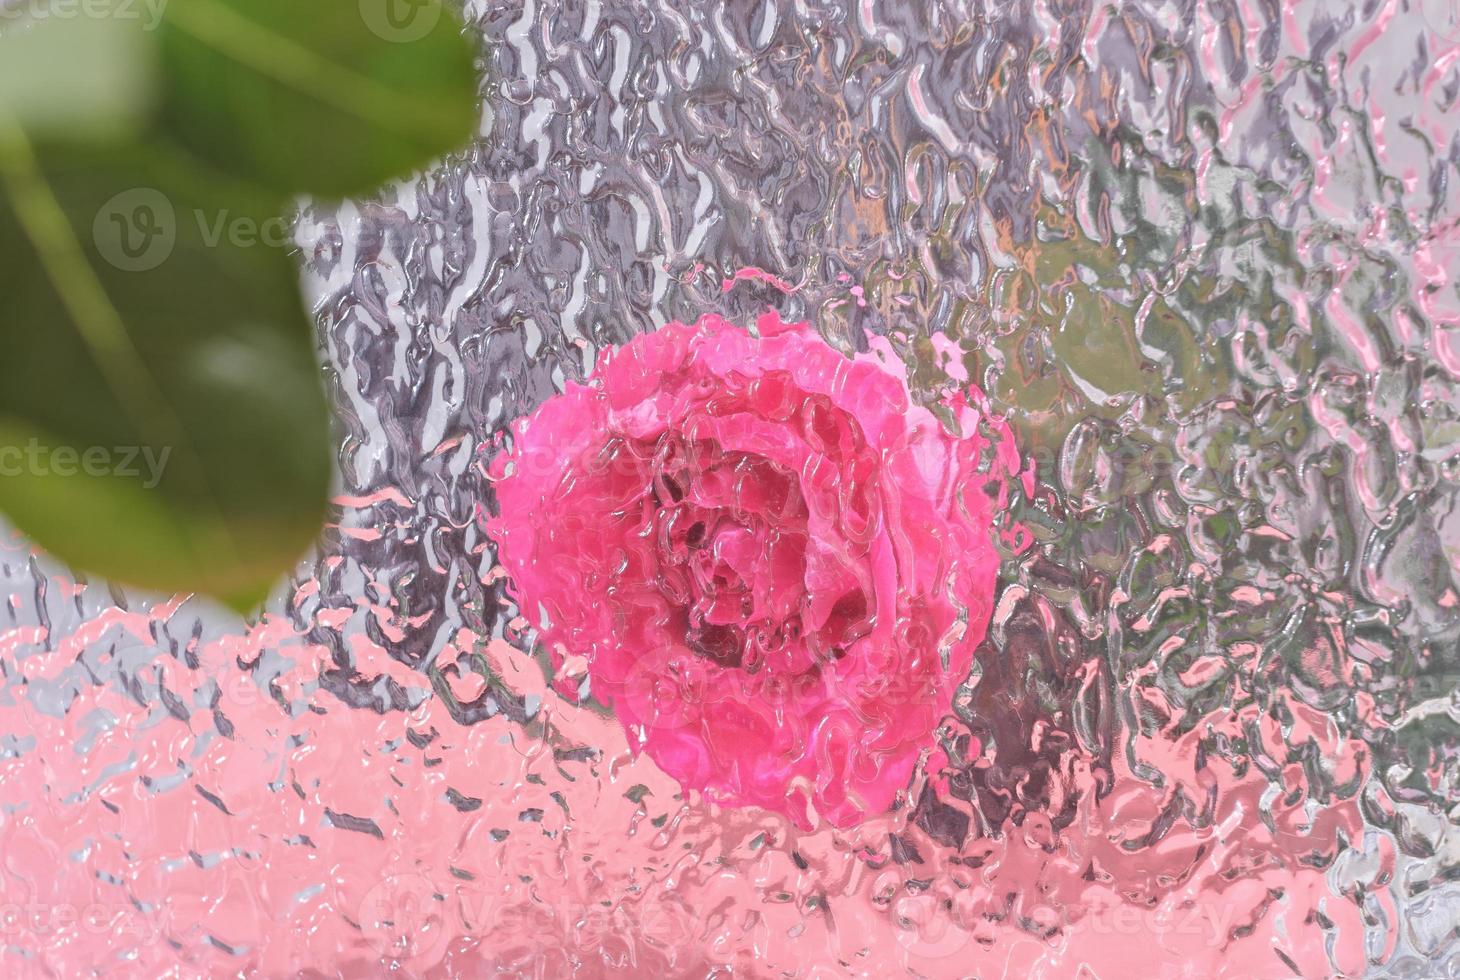 textured blurred glass background with rose flower behind. pink flower defocused. backdrop for website or advertizing, blogger holiday content, photo